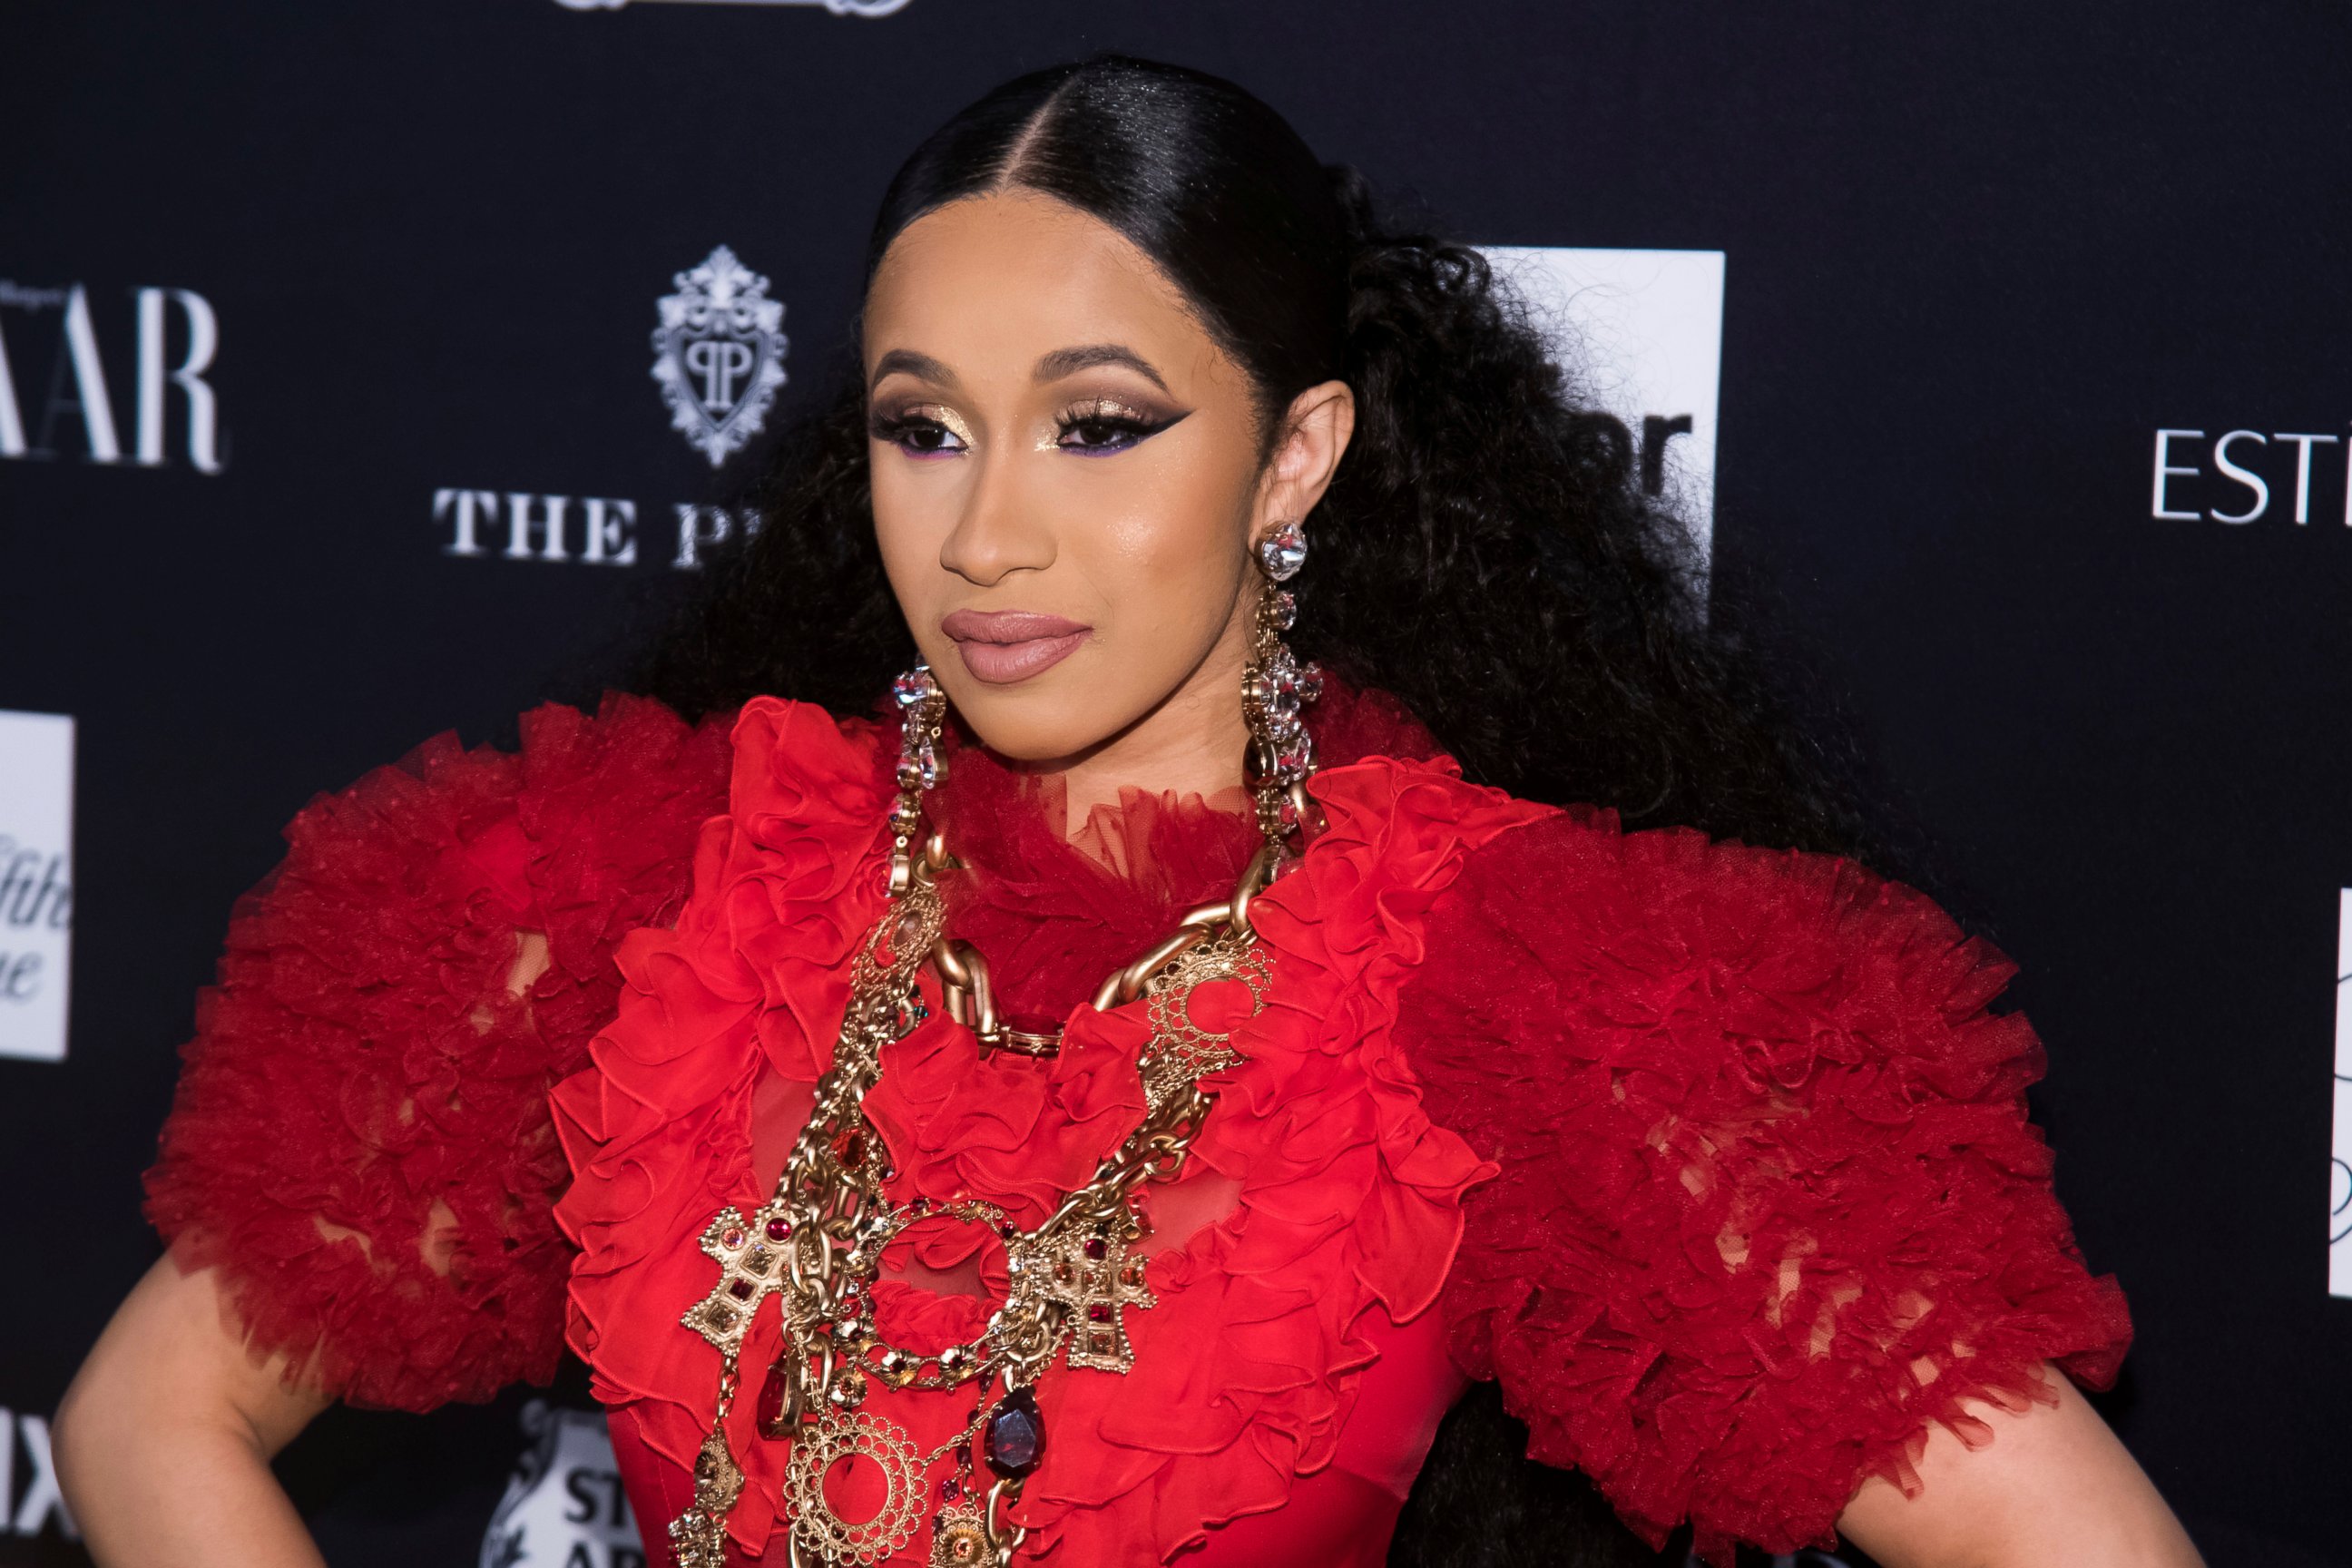 PHOTO: Cardi B attends the Harper's BAZAAR "ICONS by Carine Roitfeld" party at The Plaza on Friday, Sept. 7, 2018, New York. 